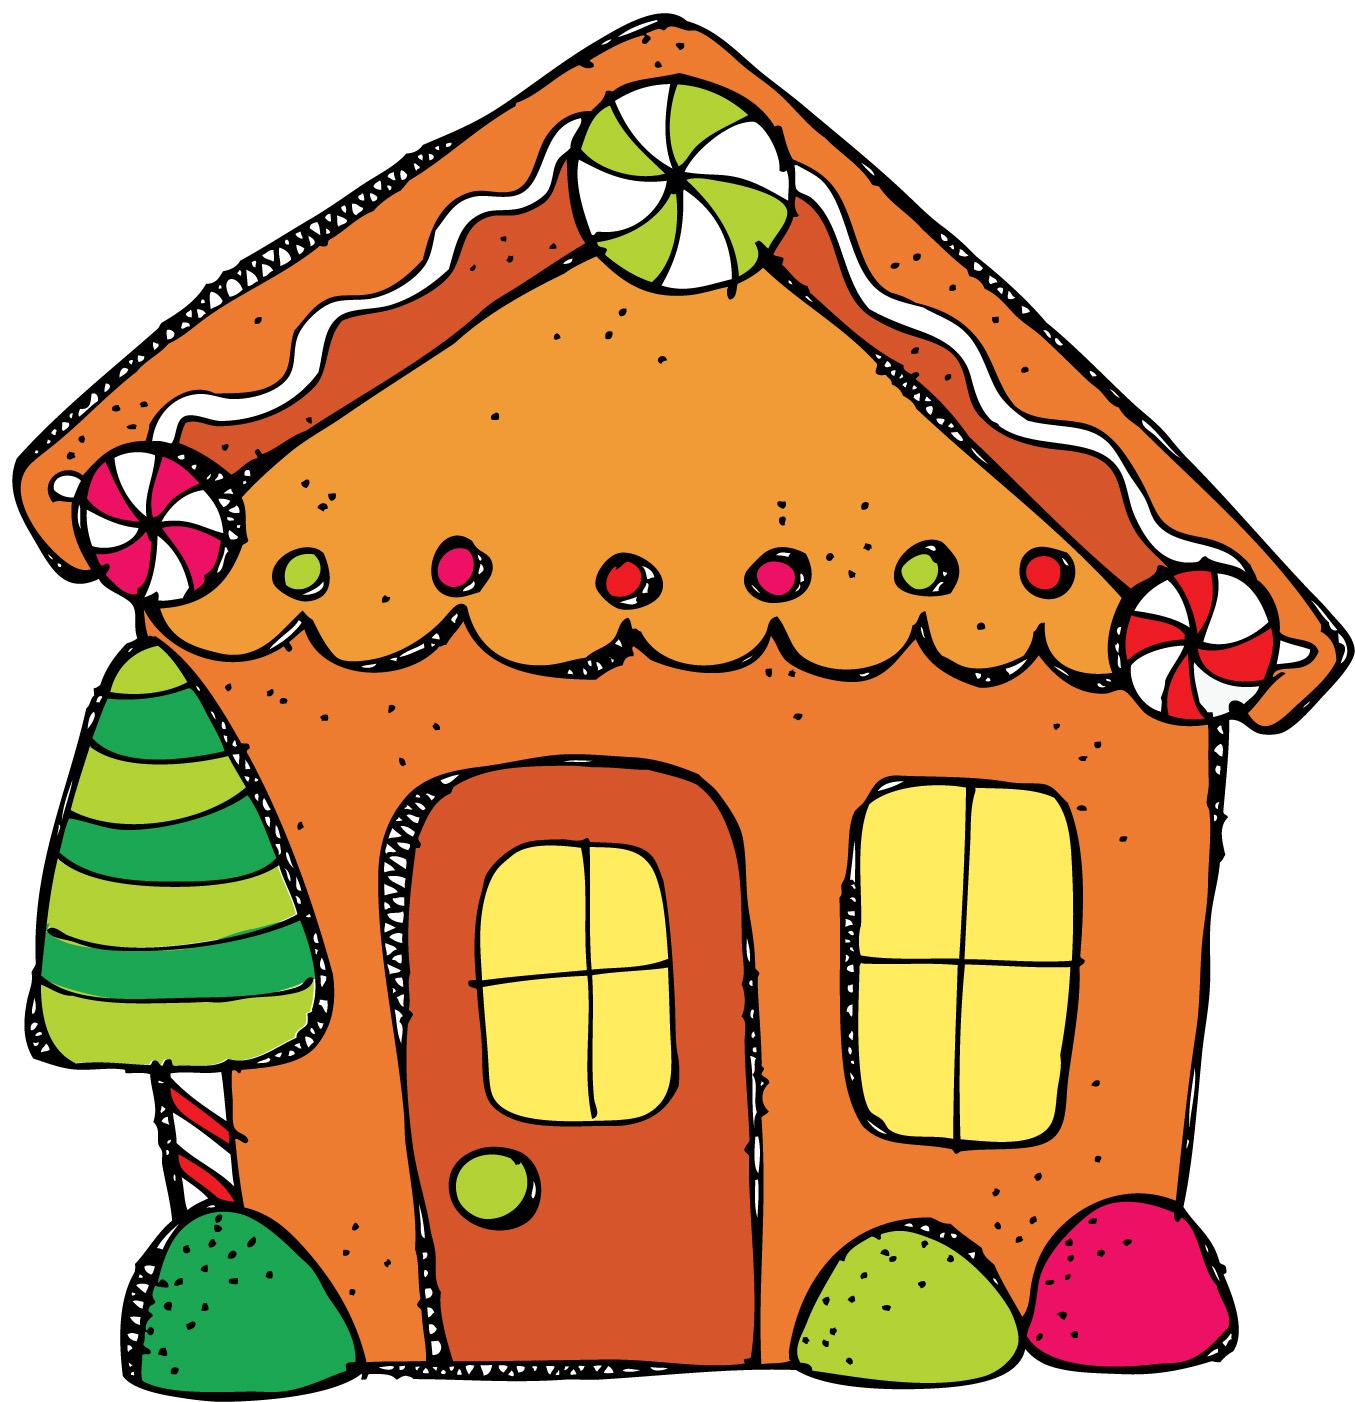 The Very Busy Kindergarten: Gingerbread House - Clipart library 